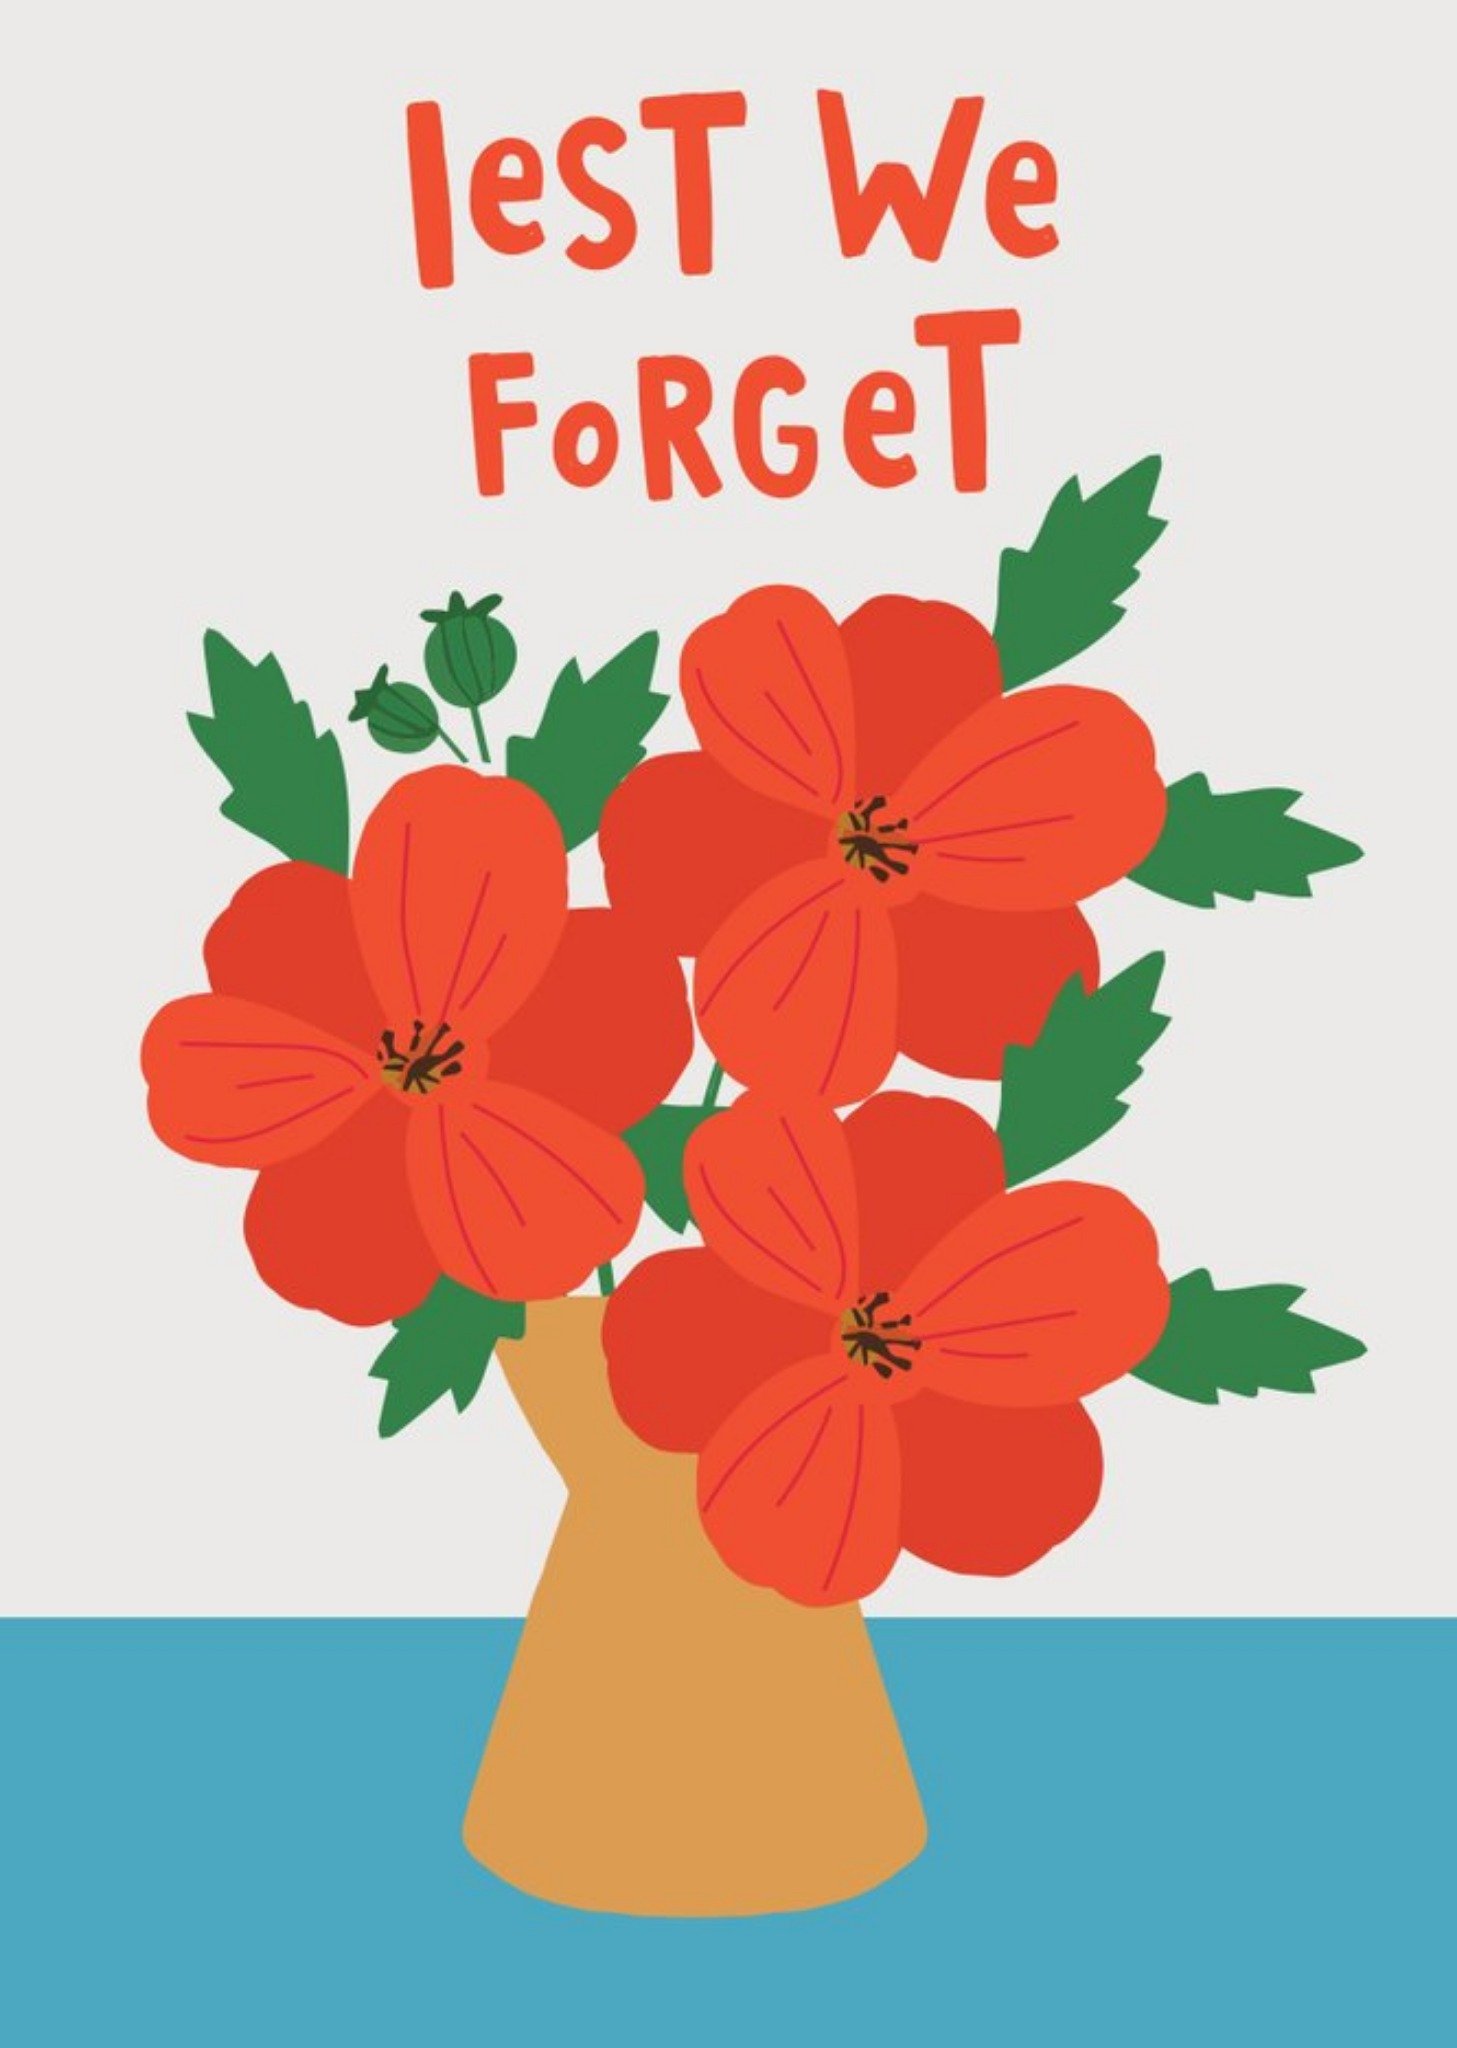 Moonpig Bright Colourful Vase Of Red Poppies Illustration Lest We Forget Card, Large